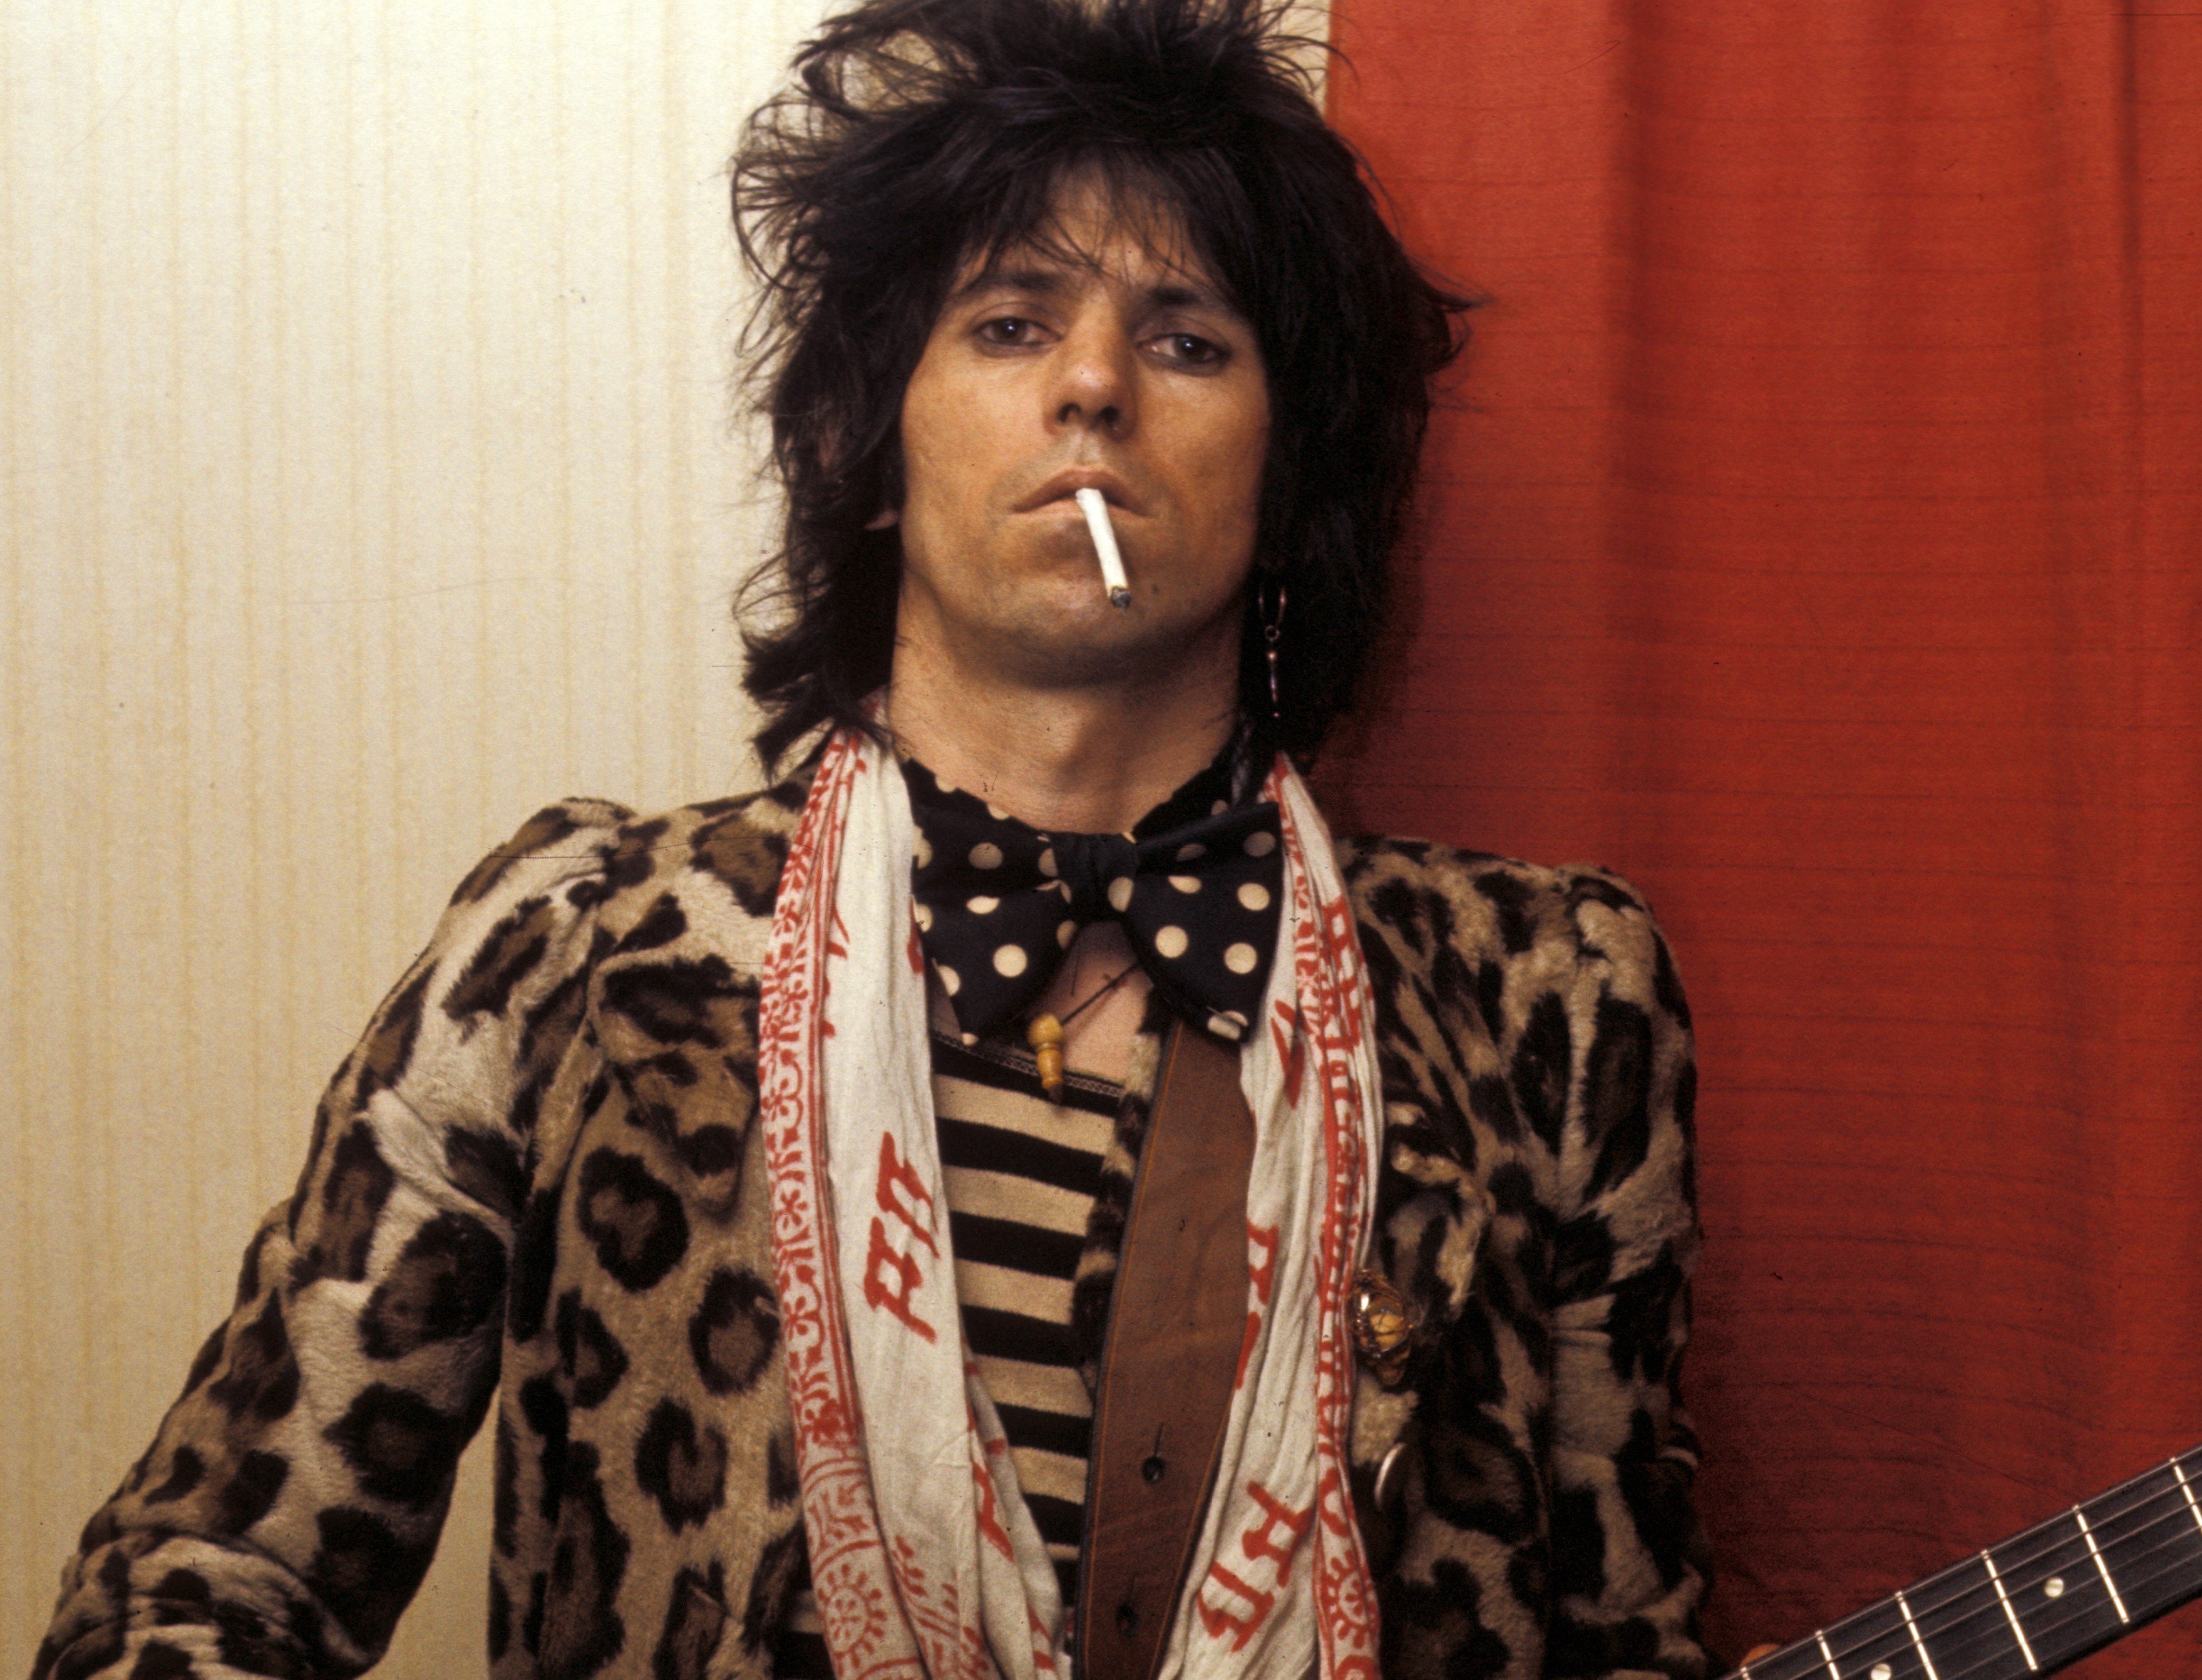 The Rolling Stones’ ‘Sympathy for the Devil’ Is ‘Uplifting’ to Keith Richards